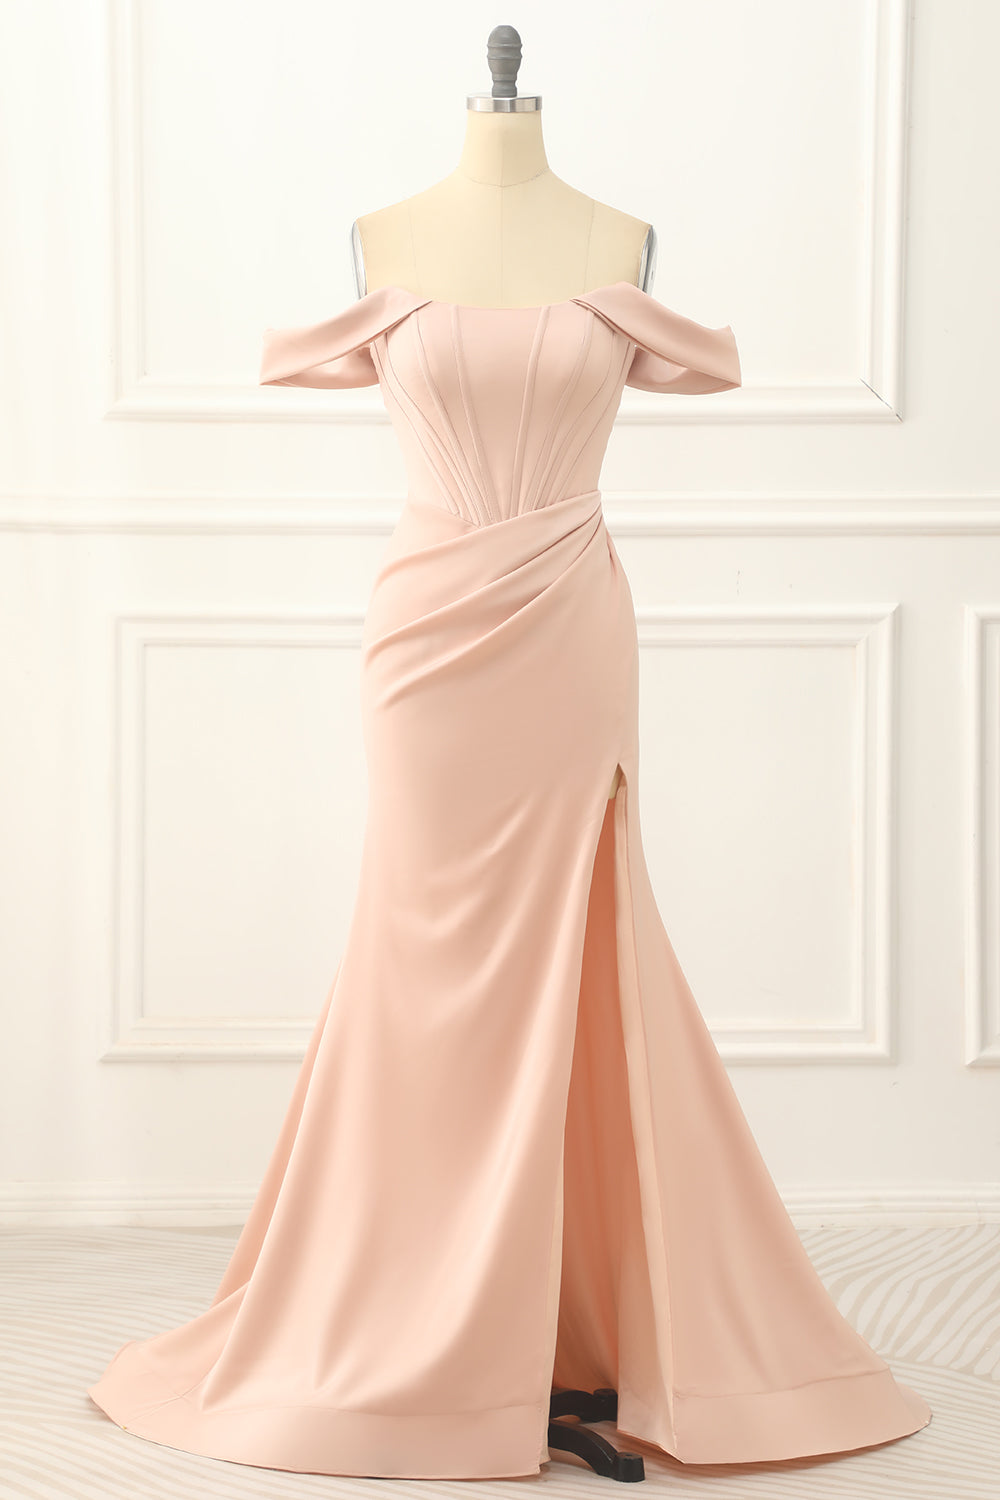 Party Dress Idea, Blush Off the Shoulder Mermaid Prom Dress with Slit